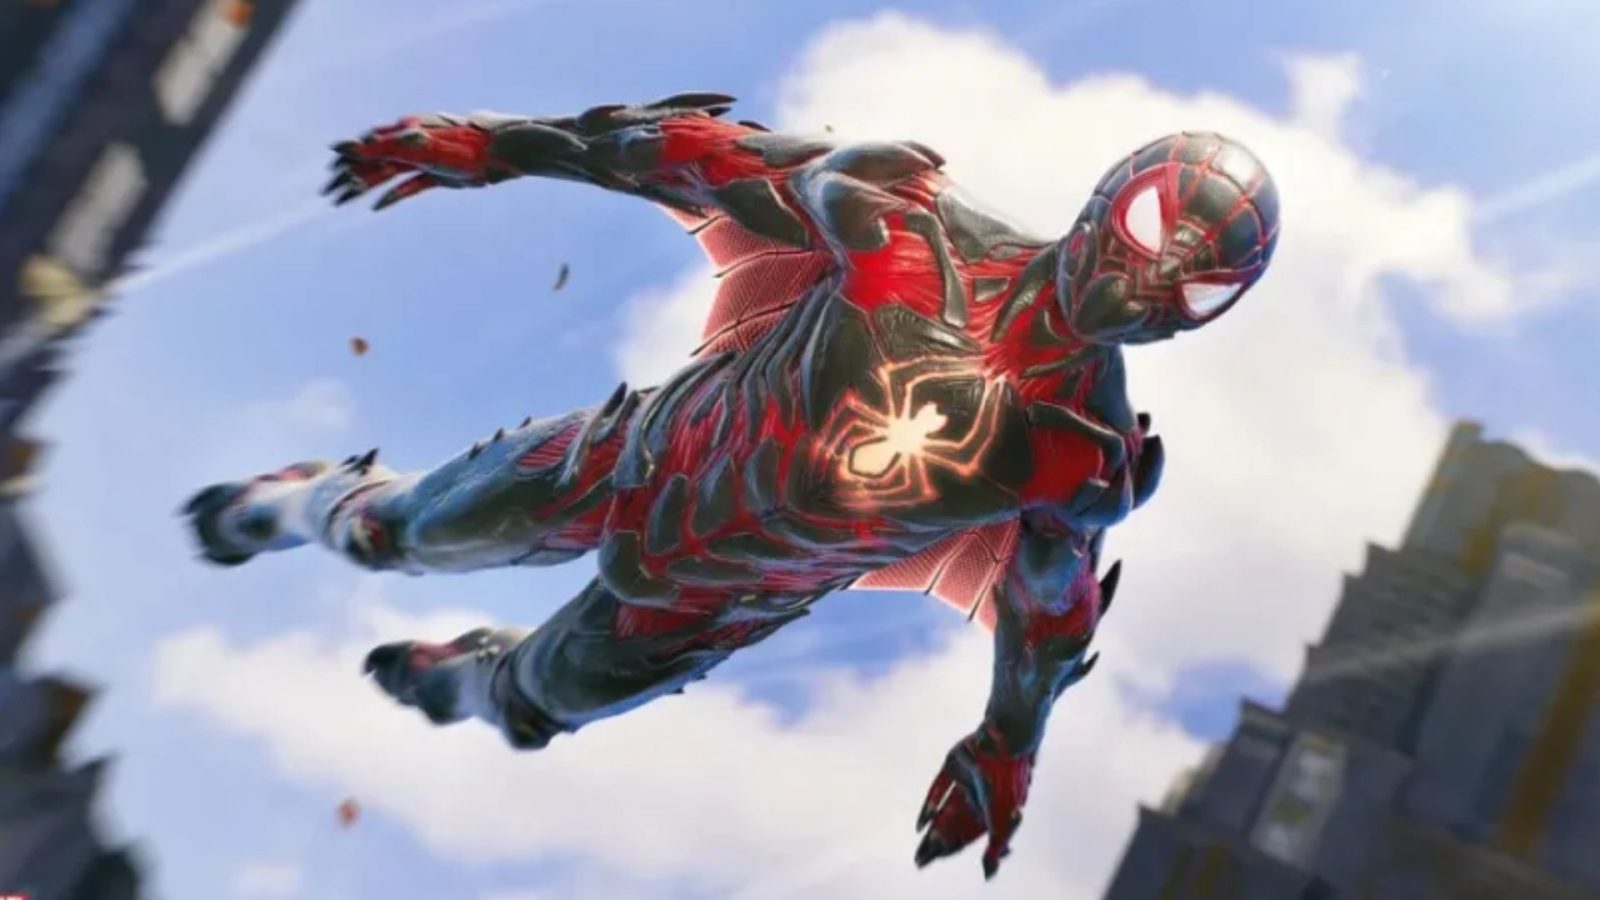 Insomniac announces Spider-Man 2 release date at…